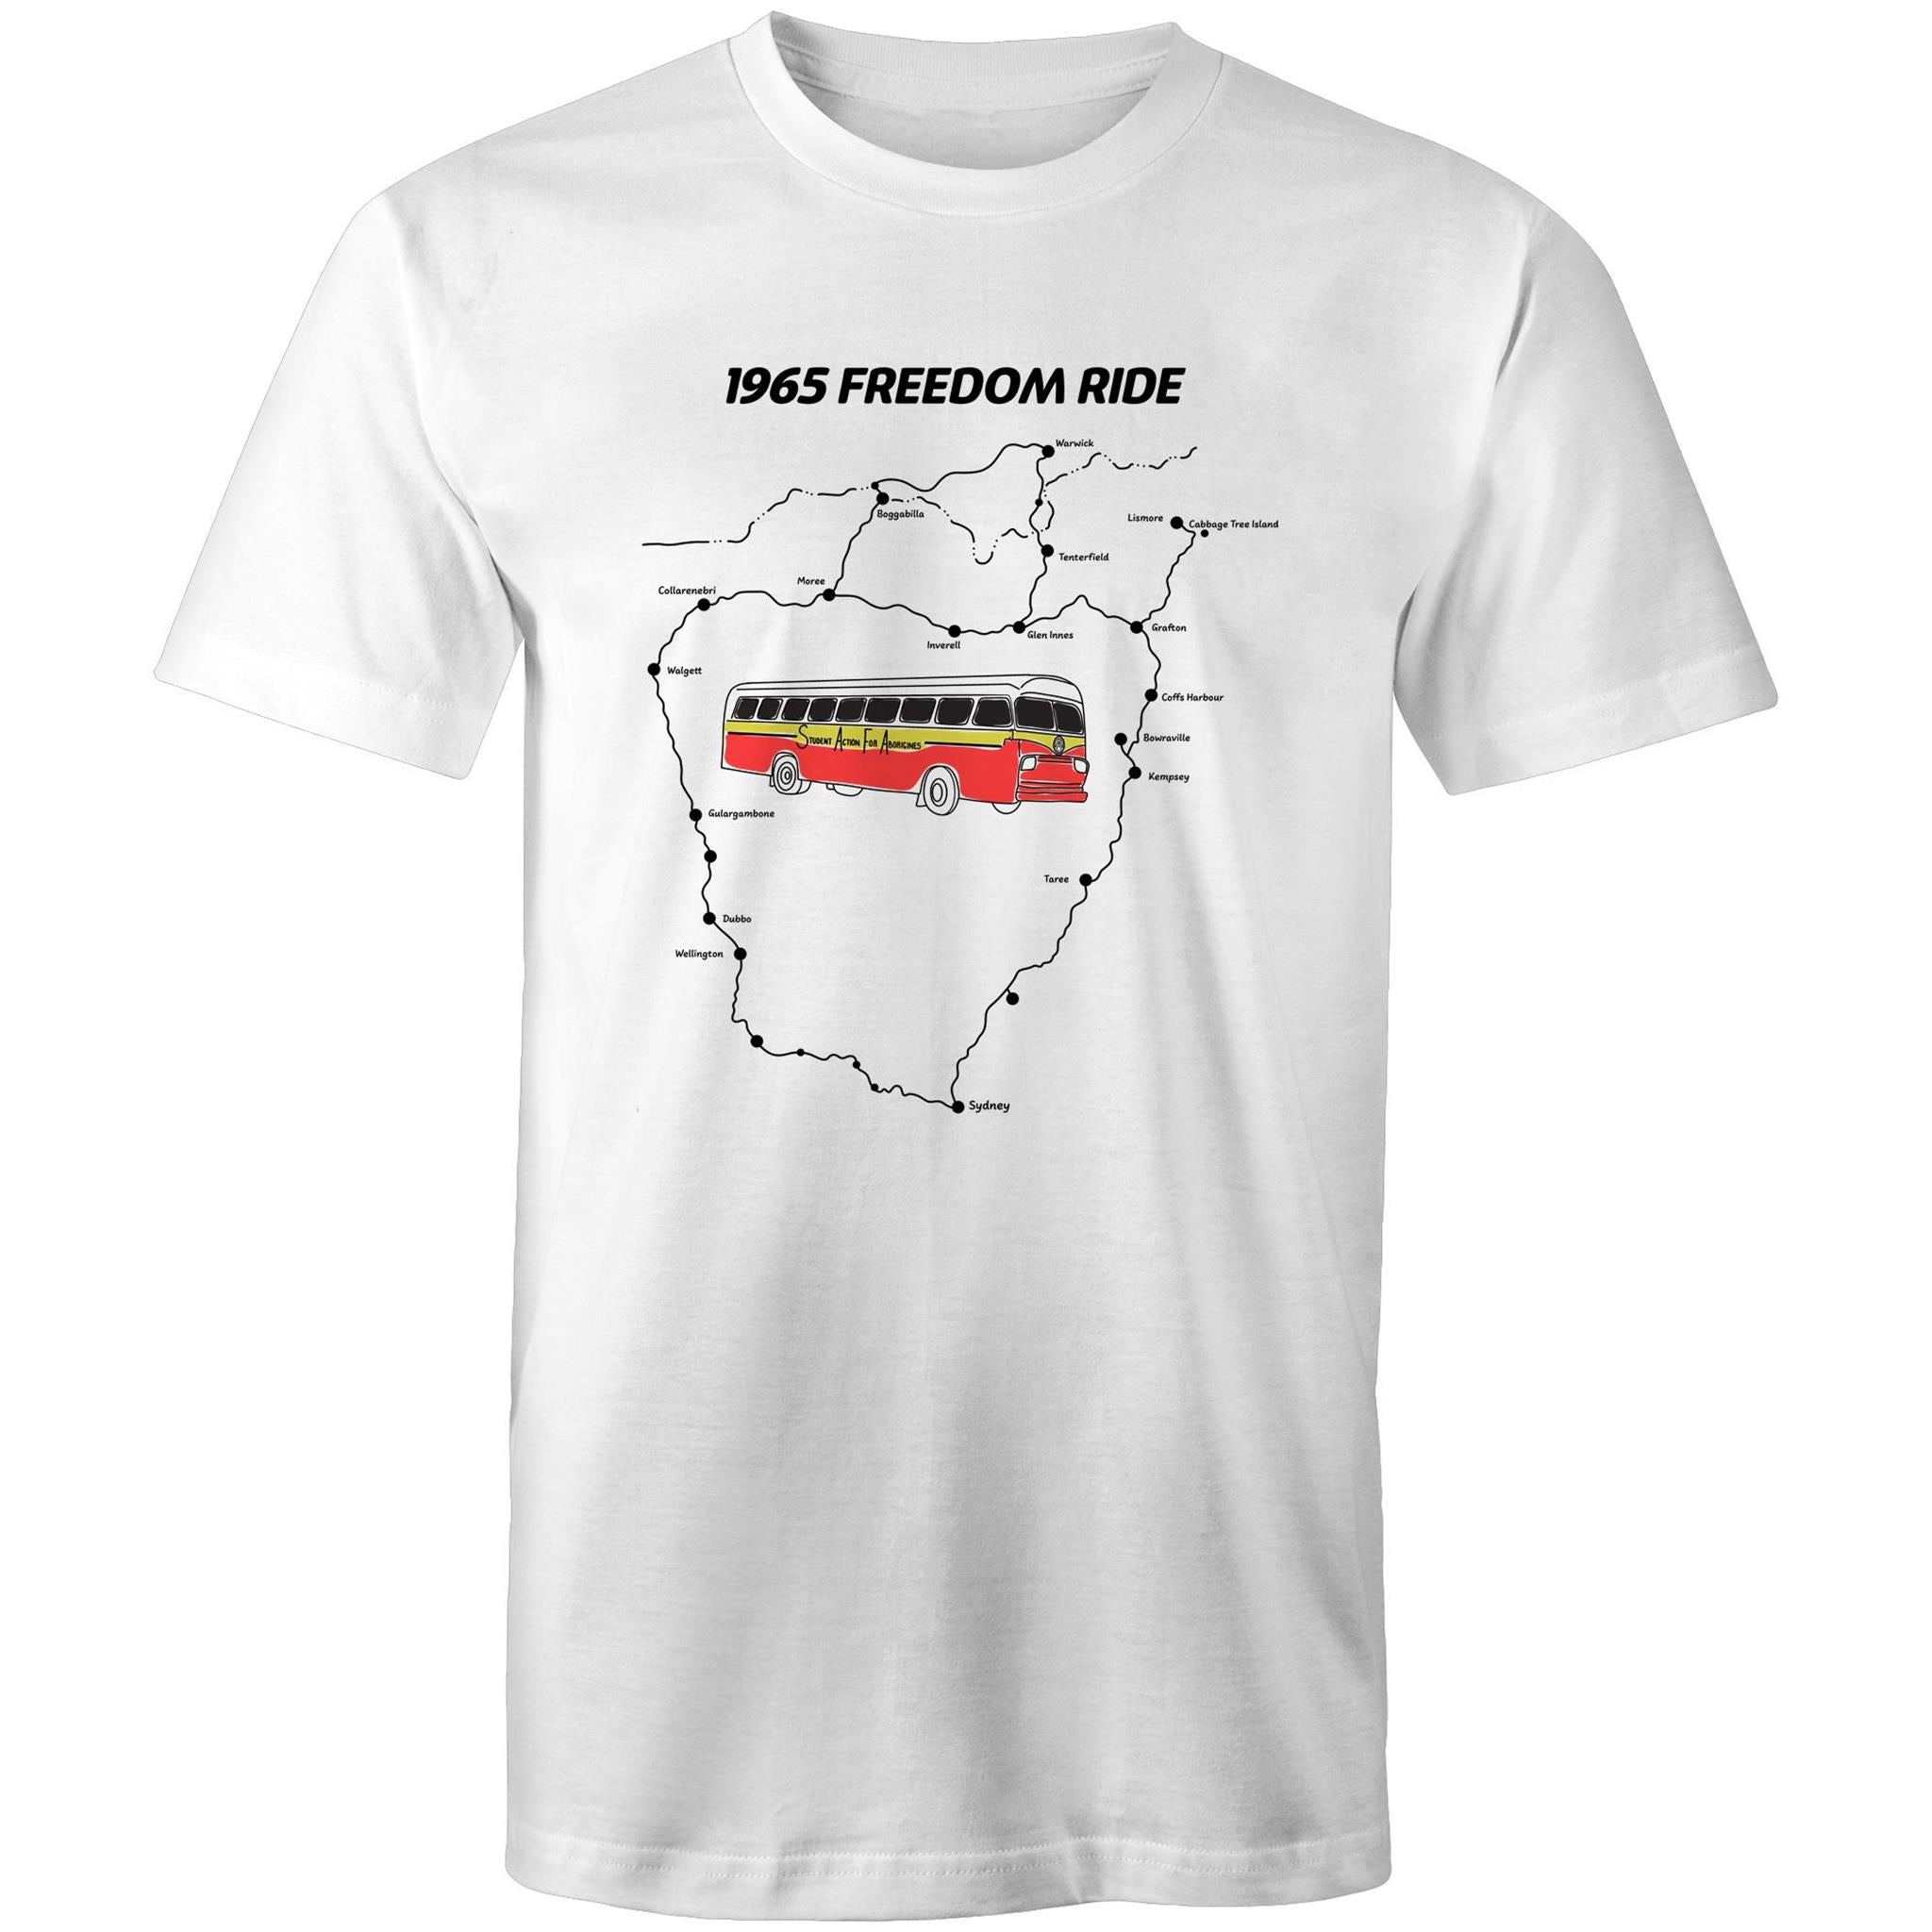 1965 Freedom Ride T-Shirt- History Collection